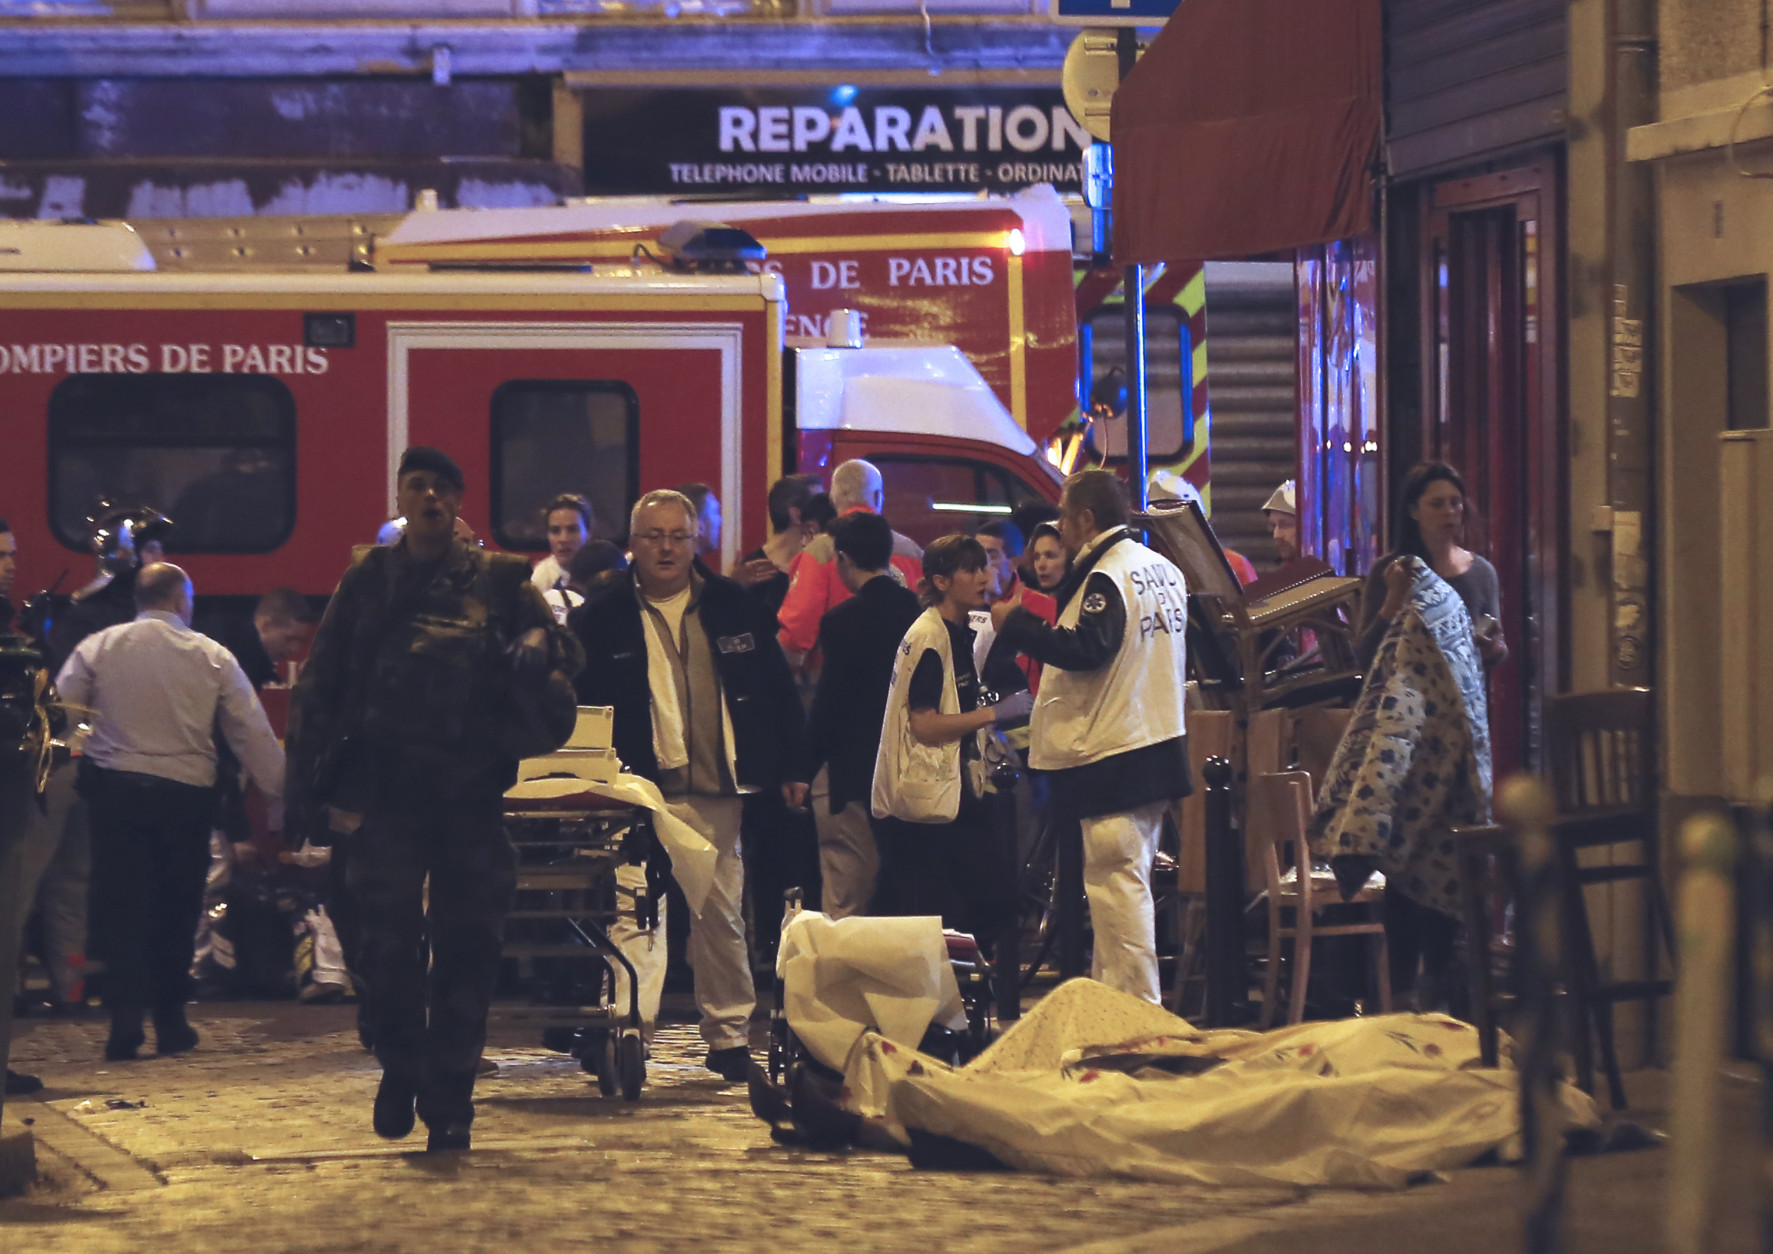 Police officers and rescue workers gather around a victim outside in the 10th district of Paris, Friday, Nov. 13, 2015.  At least 35 people were killed Friday in shootings and explosions around Paris, many of them in a popular concert hall where patrons were taken hostage, police and medical officials said. (AP Photo/Jacques Brinon)